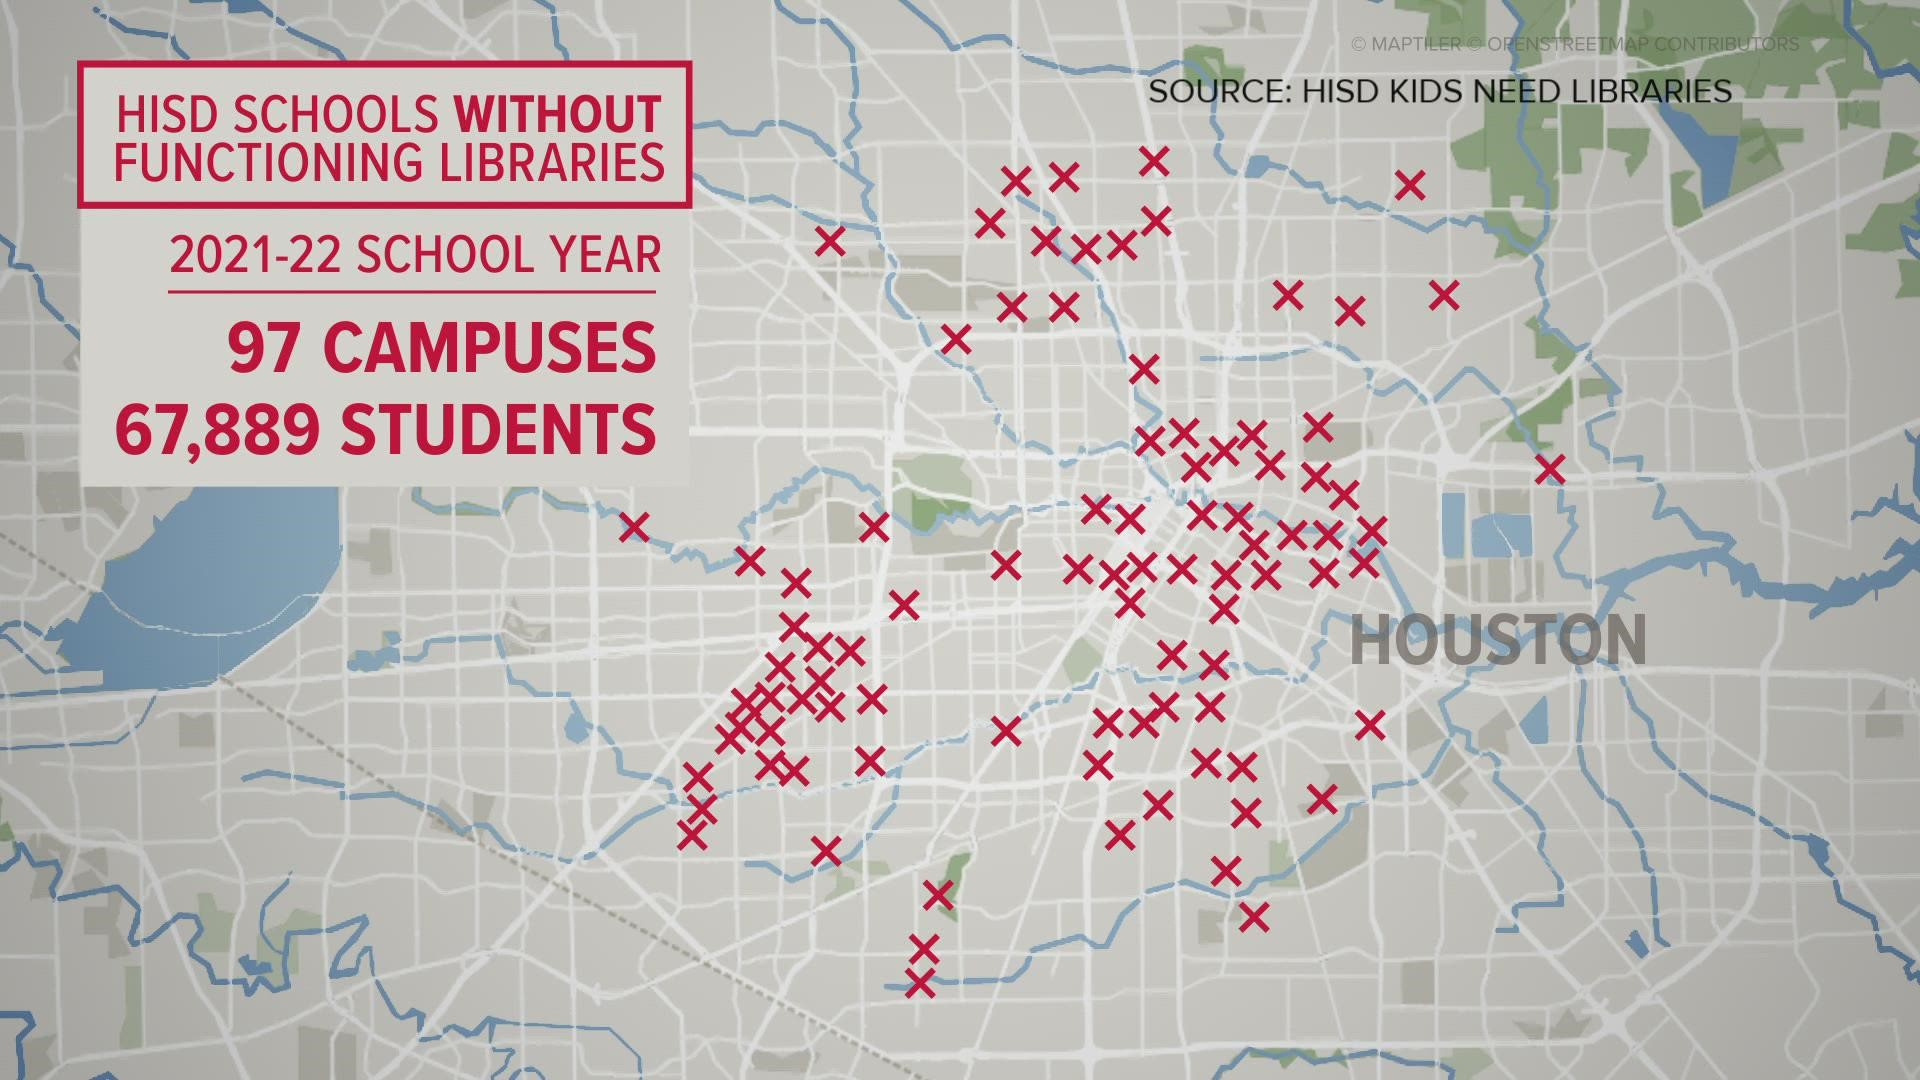 The group, HISD Kids Need Libraries, claims 30% of the district's campuses don't have fully functioning libraries.